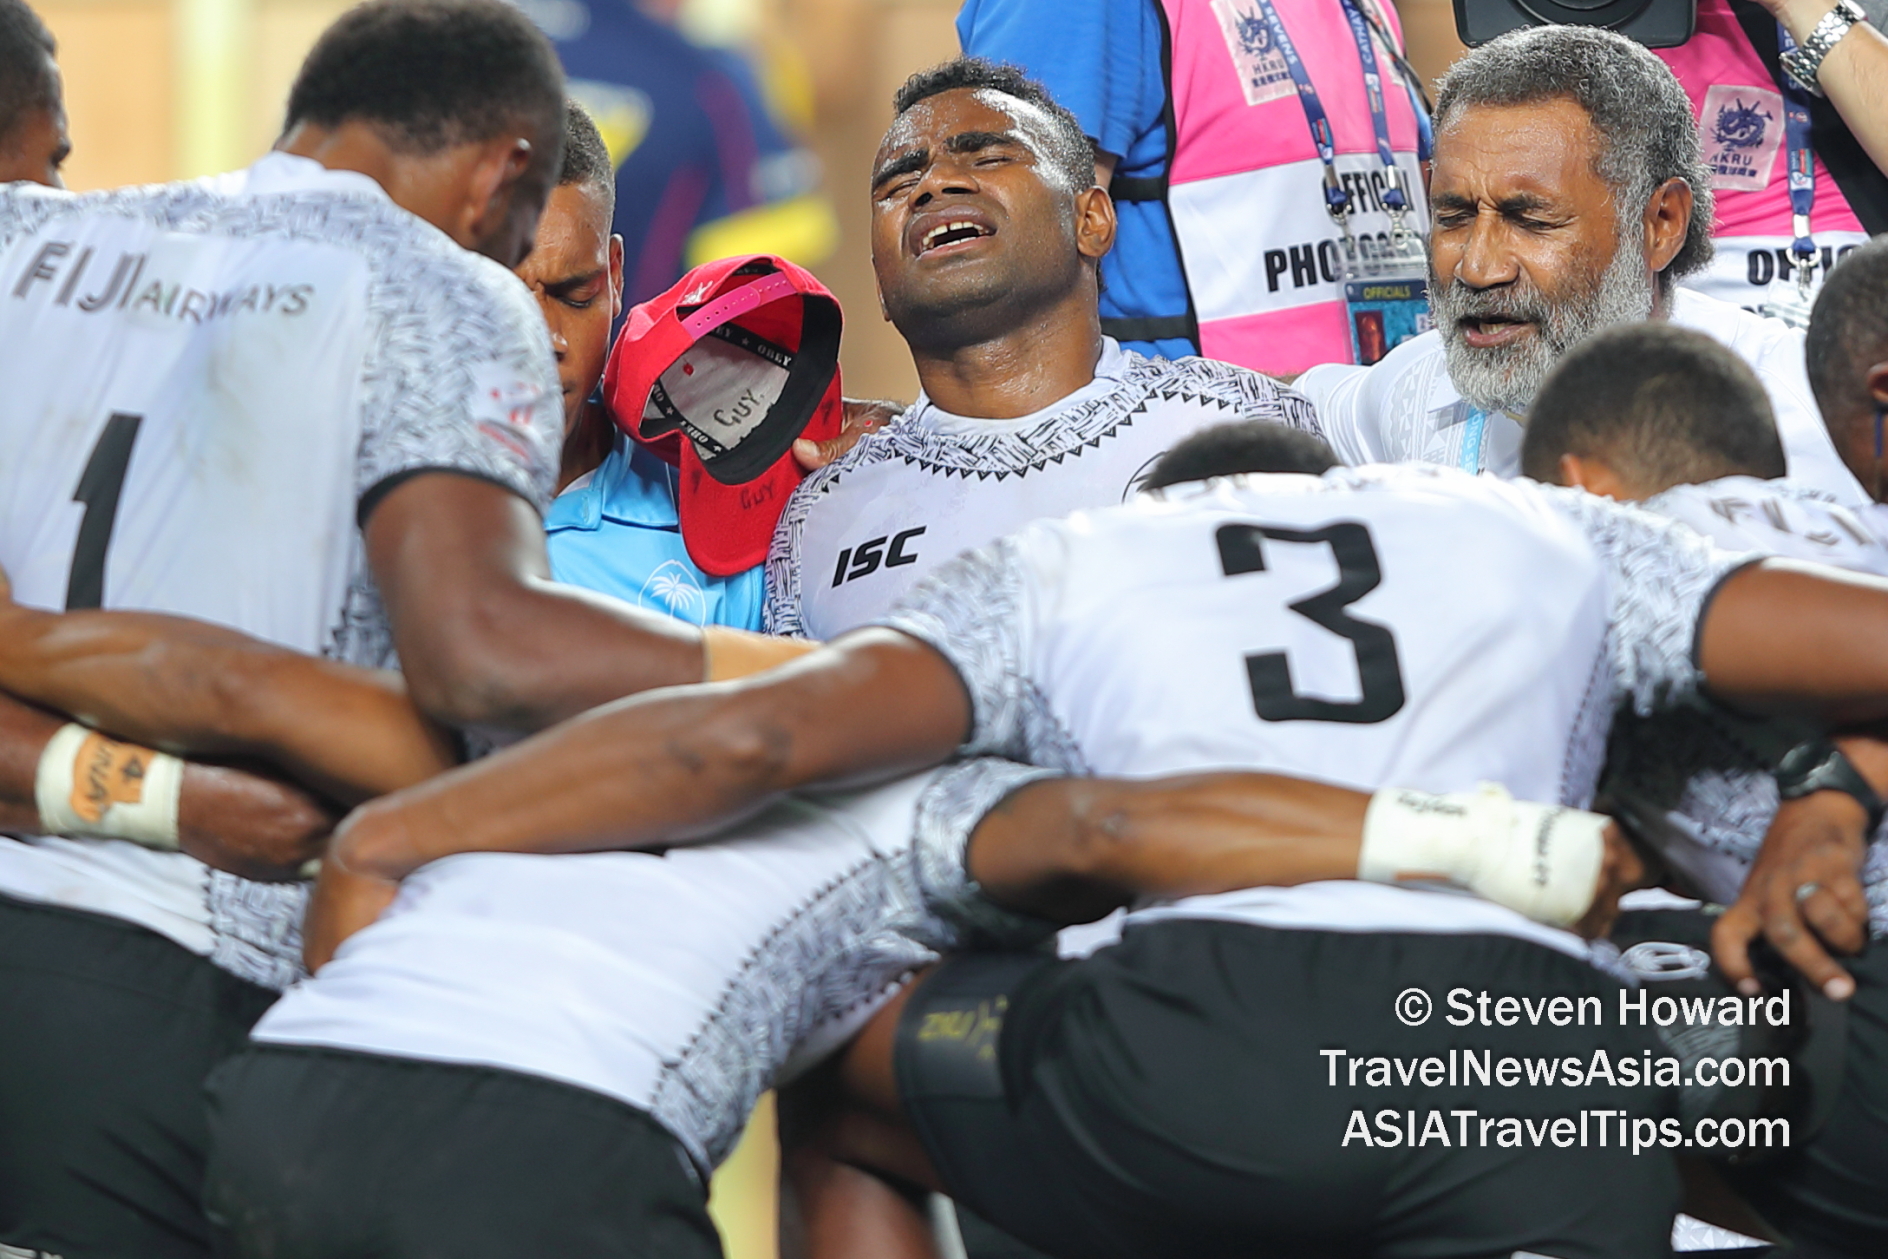 Fiji Sevens team praying after record 5th consecutive victory at HK7s in 2019. Picture by Steven Howard of TravelNewsAsia.com Click to enlarge.